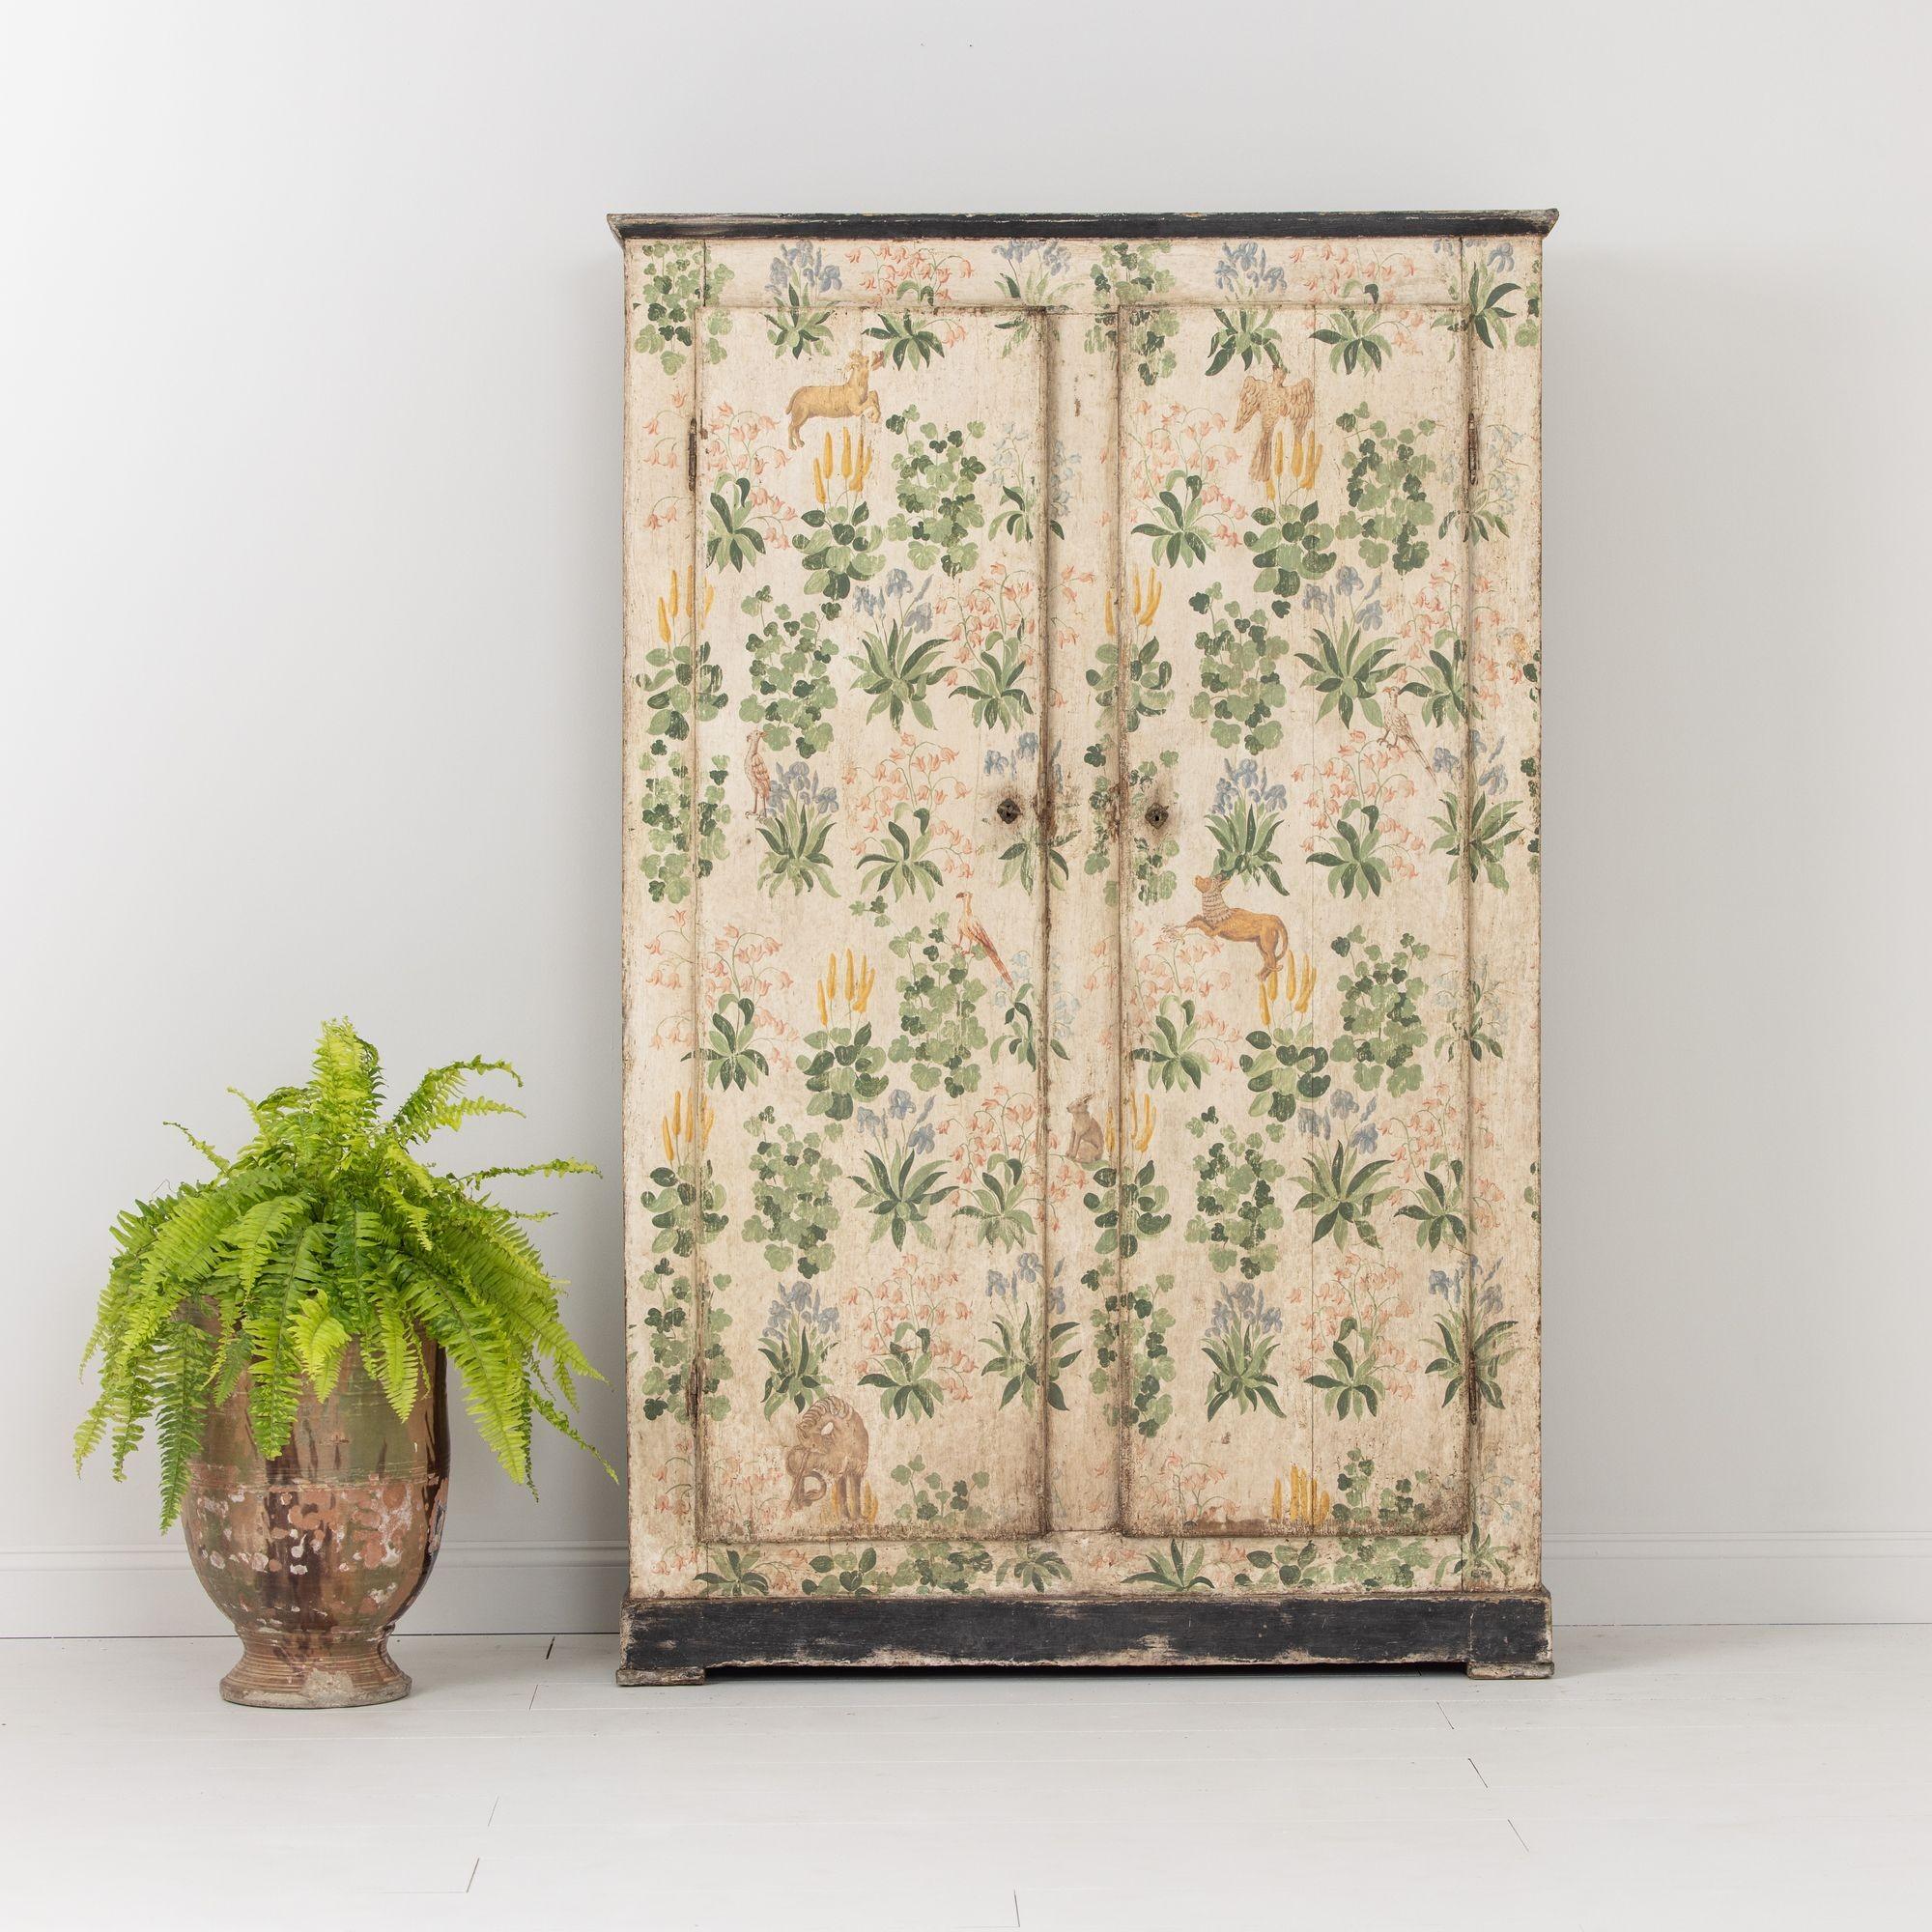 A Florentine armoire cabinet from the 19th century, Italy c. 1850. A beautiful, one-of-a-kind piece with hand-painted decoration inspired by an antique fabric fragment, featuring naturalistic animals and foliage throughout. A Maison & Co. favorite.